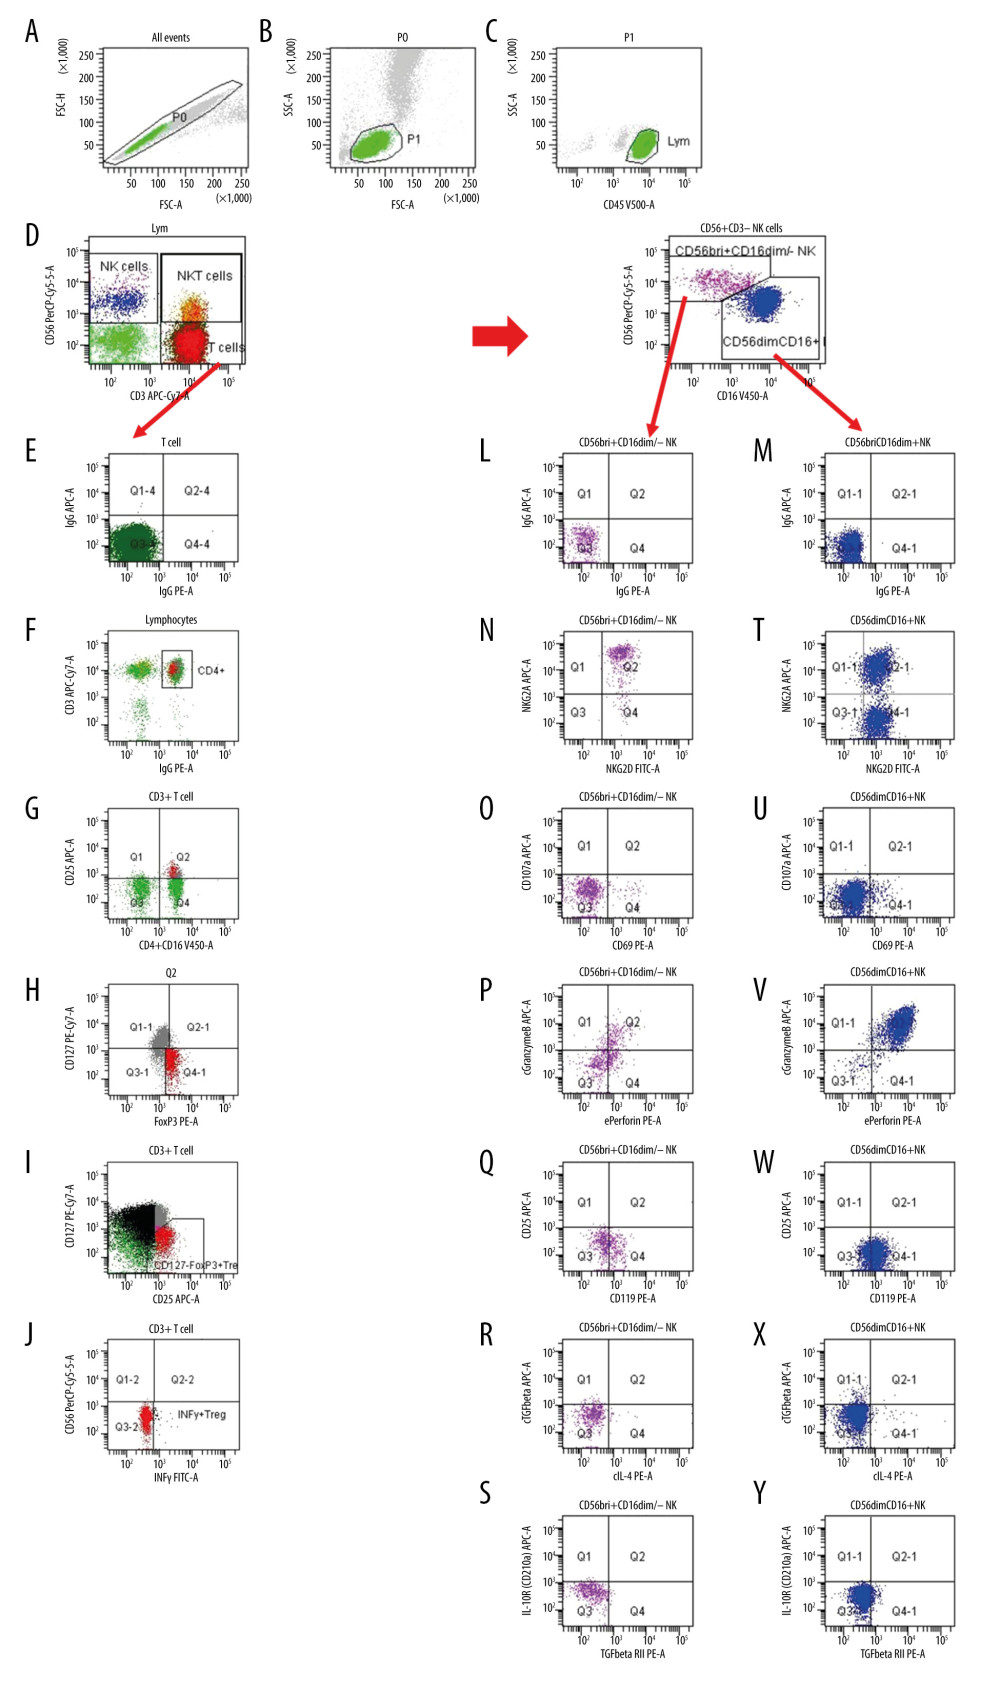 Gating strategy for the determination of NK and Treg cell subsets. (A) After excluding doublets from the total of acquired events, peripheral blood lymphocytes (PBL) were gated according to (B) FSC/SSC and (C) CD45/SSC dot plot. (D) Then, CD3–CD56+ NK cells, CD3+CD56+ NKT cells and CD3+ T cells were gated in the CD3 APC-Cy7/CD56 PerCPCy5.5 dot plot. (K) CD3–CD56+ NK cells were further analyzed according to the intensity of the CD56 and CD16 expression (CD16 V450/CD56 PerCPCy5.5 dot plot). (E, L, M) Further, dependent on isotype controls, subsets of (F–J) T cells, (N–S) CD56brightCD16dim/− NK cells and (T–Y) CD56dimCD16+ NK cells were analyzed using the depicted gate settings in dot plots of (N, T) NKG2D/NKG2A, (O, U) CD69/CD107, (P, V) perforin/granzymeB, (Q, W) IFNγR/CD25, (R, X) IL4/TGFβ and (S, Y) TGFβRII/IL10R. With respect to the determination of IFNγ+ Treg, CD3+ T lymphocytes were further analyzed and (F) CD4+ lymphocytes were identified using a mixture of CD4 and CD16 monoclonal antibody with the same color (CD4+CD16 V450/CD3 APC-Cy7 dot plot). (G) Further, CD4+CD25+ lymphocytes were gated using CD25 and the mixture of CD4 and CD16 monoclonal antibody (CD25 APC/CD4+CD16 V450 dot plot). (H) Then, CD127–Foxp3+ Treg were determined within the CD4+CD25+ lymphocyte subset (CD127 PE-Cy7/Foxp3 PE dot plot). (I) CD127-Foxp3+ Treg were additionally gated in a CD127/CD25 gate based on all CD3+ T cells (CD127 PE-Cy7/CD25 APC dot plot) and (J) IFNγ+ Treg were determined using a CD56/IFNγ dot plot (CD56 PerCPCy5.5/IFNγ FITC). FSC – forward-scattered light; SSC – side-scattered light.